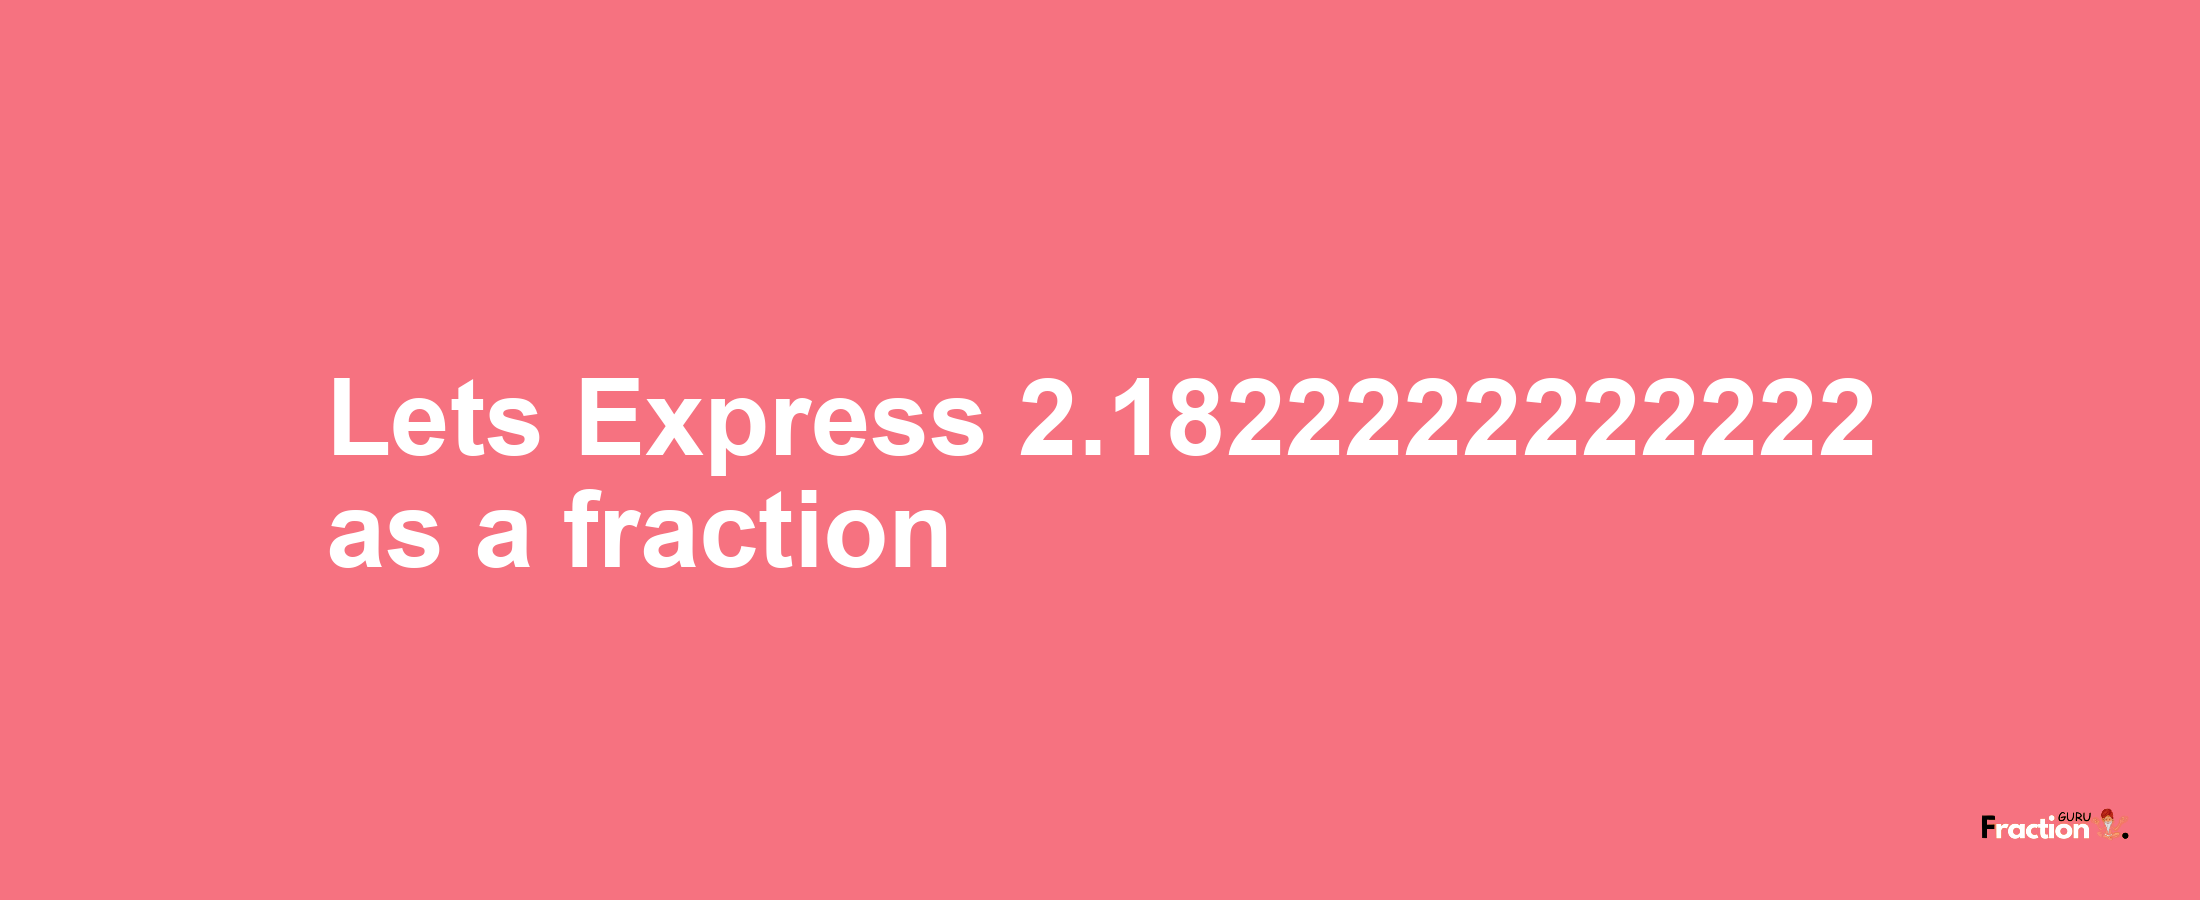 Lets Express 2.1822222222222 as afraction